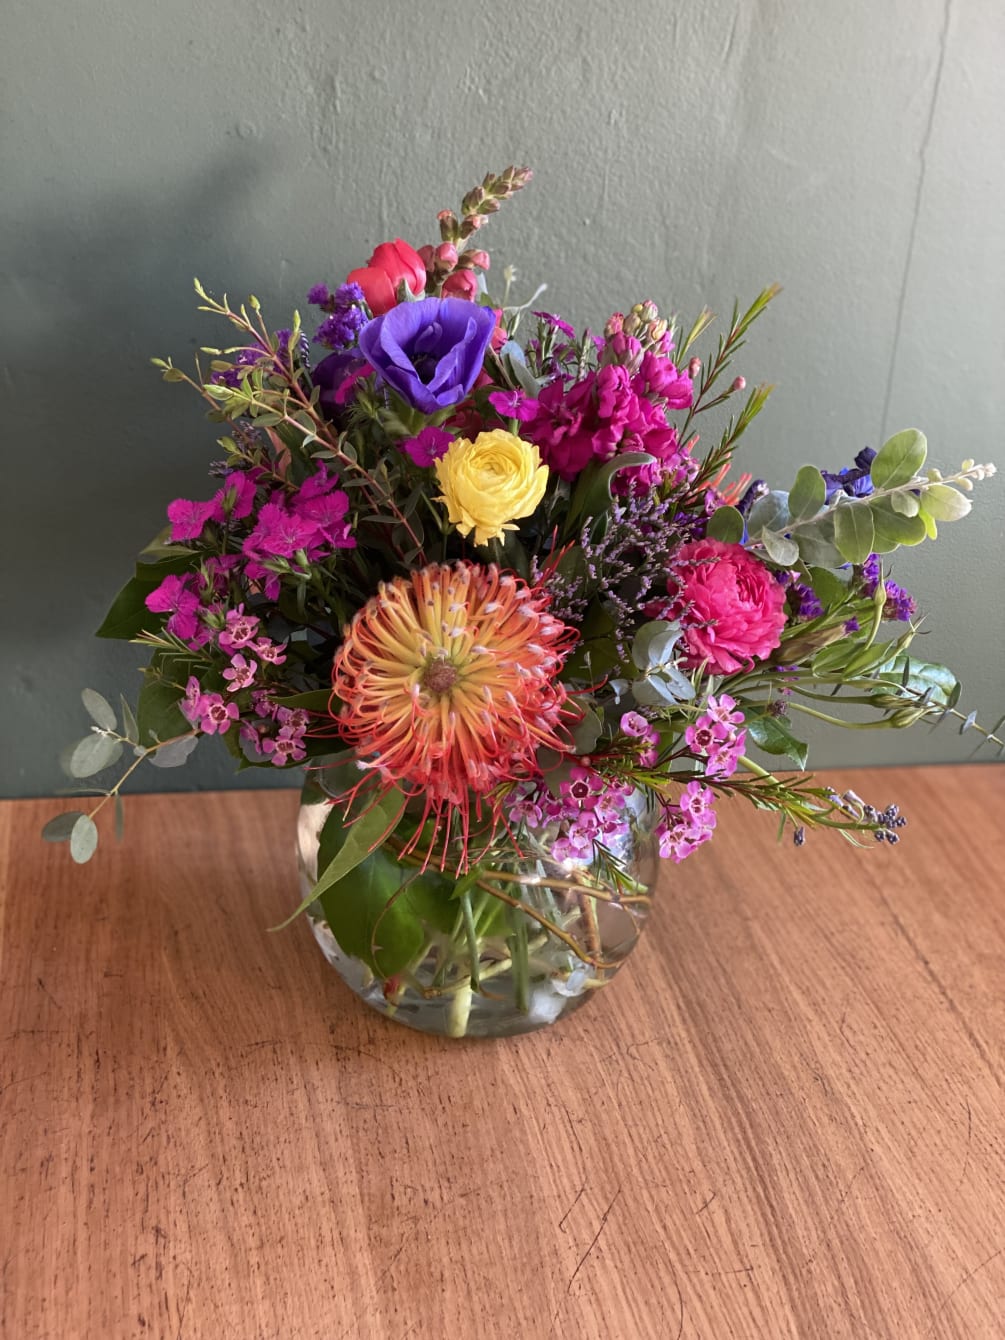 An arrangement of wild flowers that include pincushion, snap dragon, roses, ranunculus